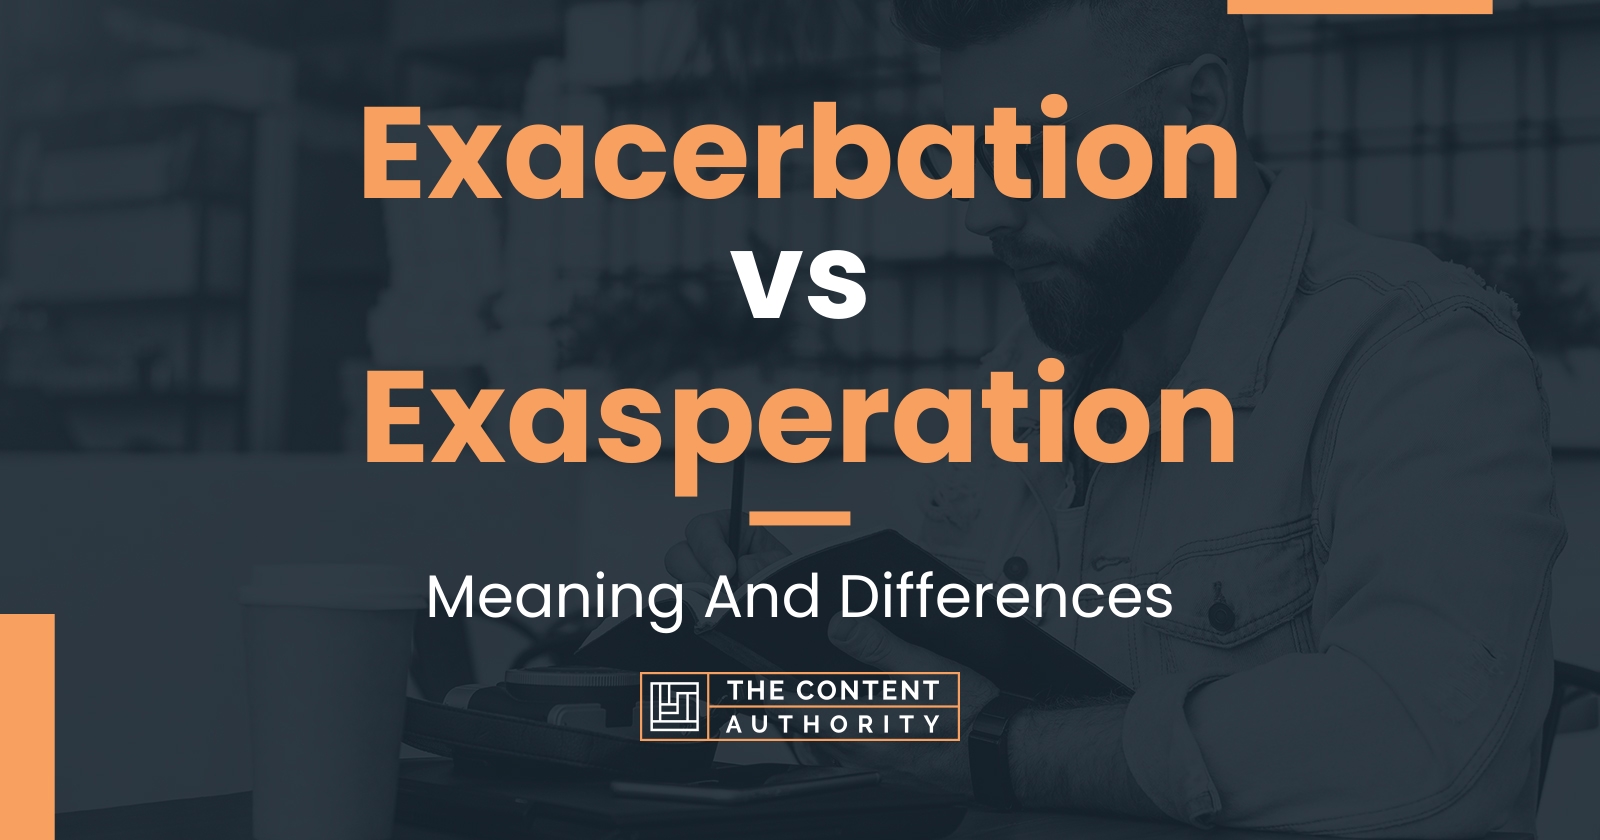 Exacerbation vs Exasperation: Meaning And Differences